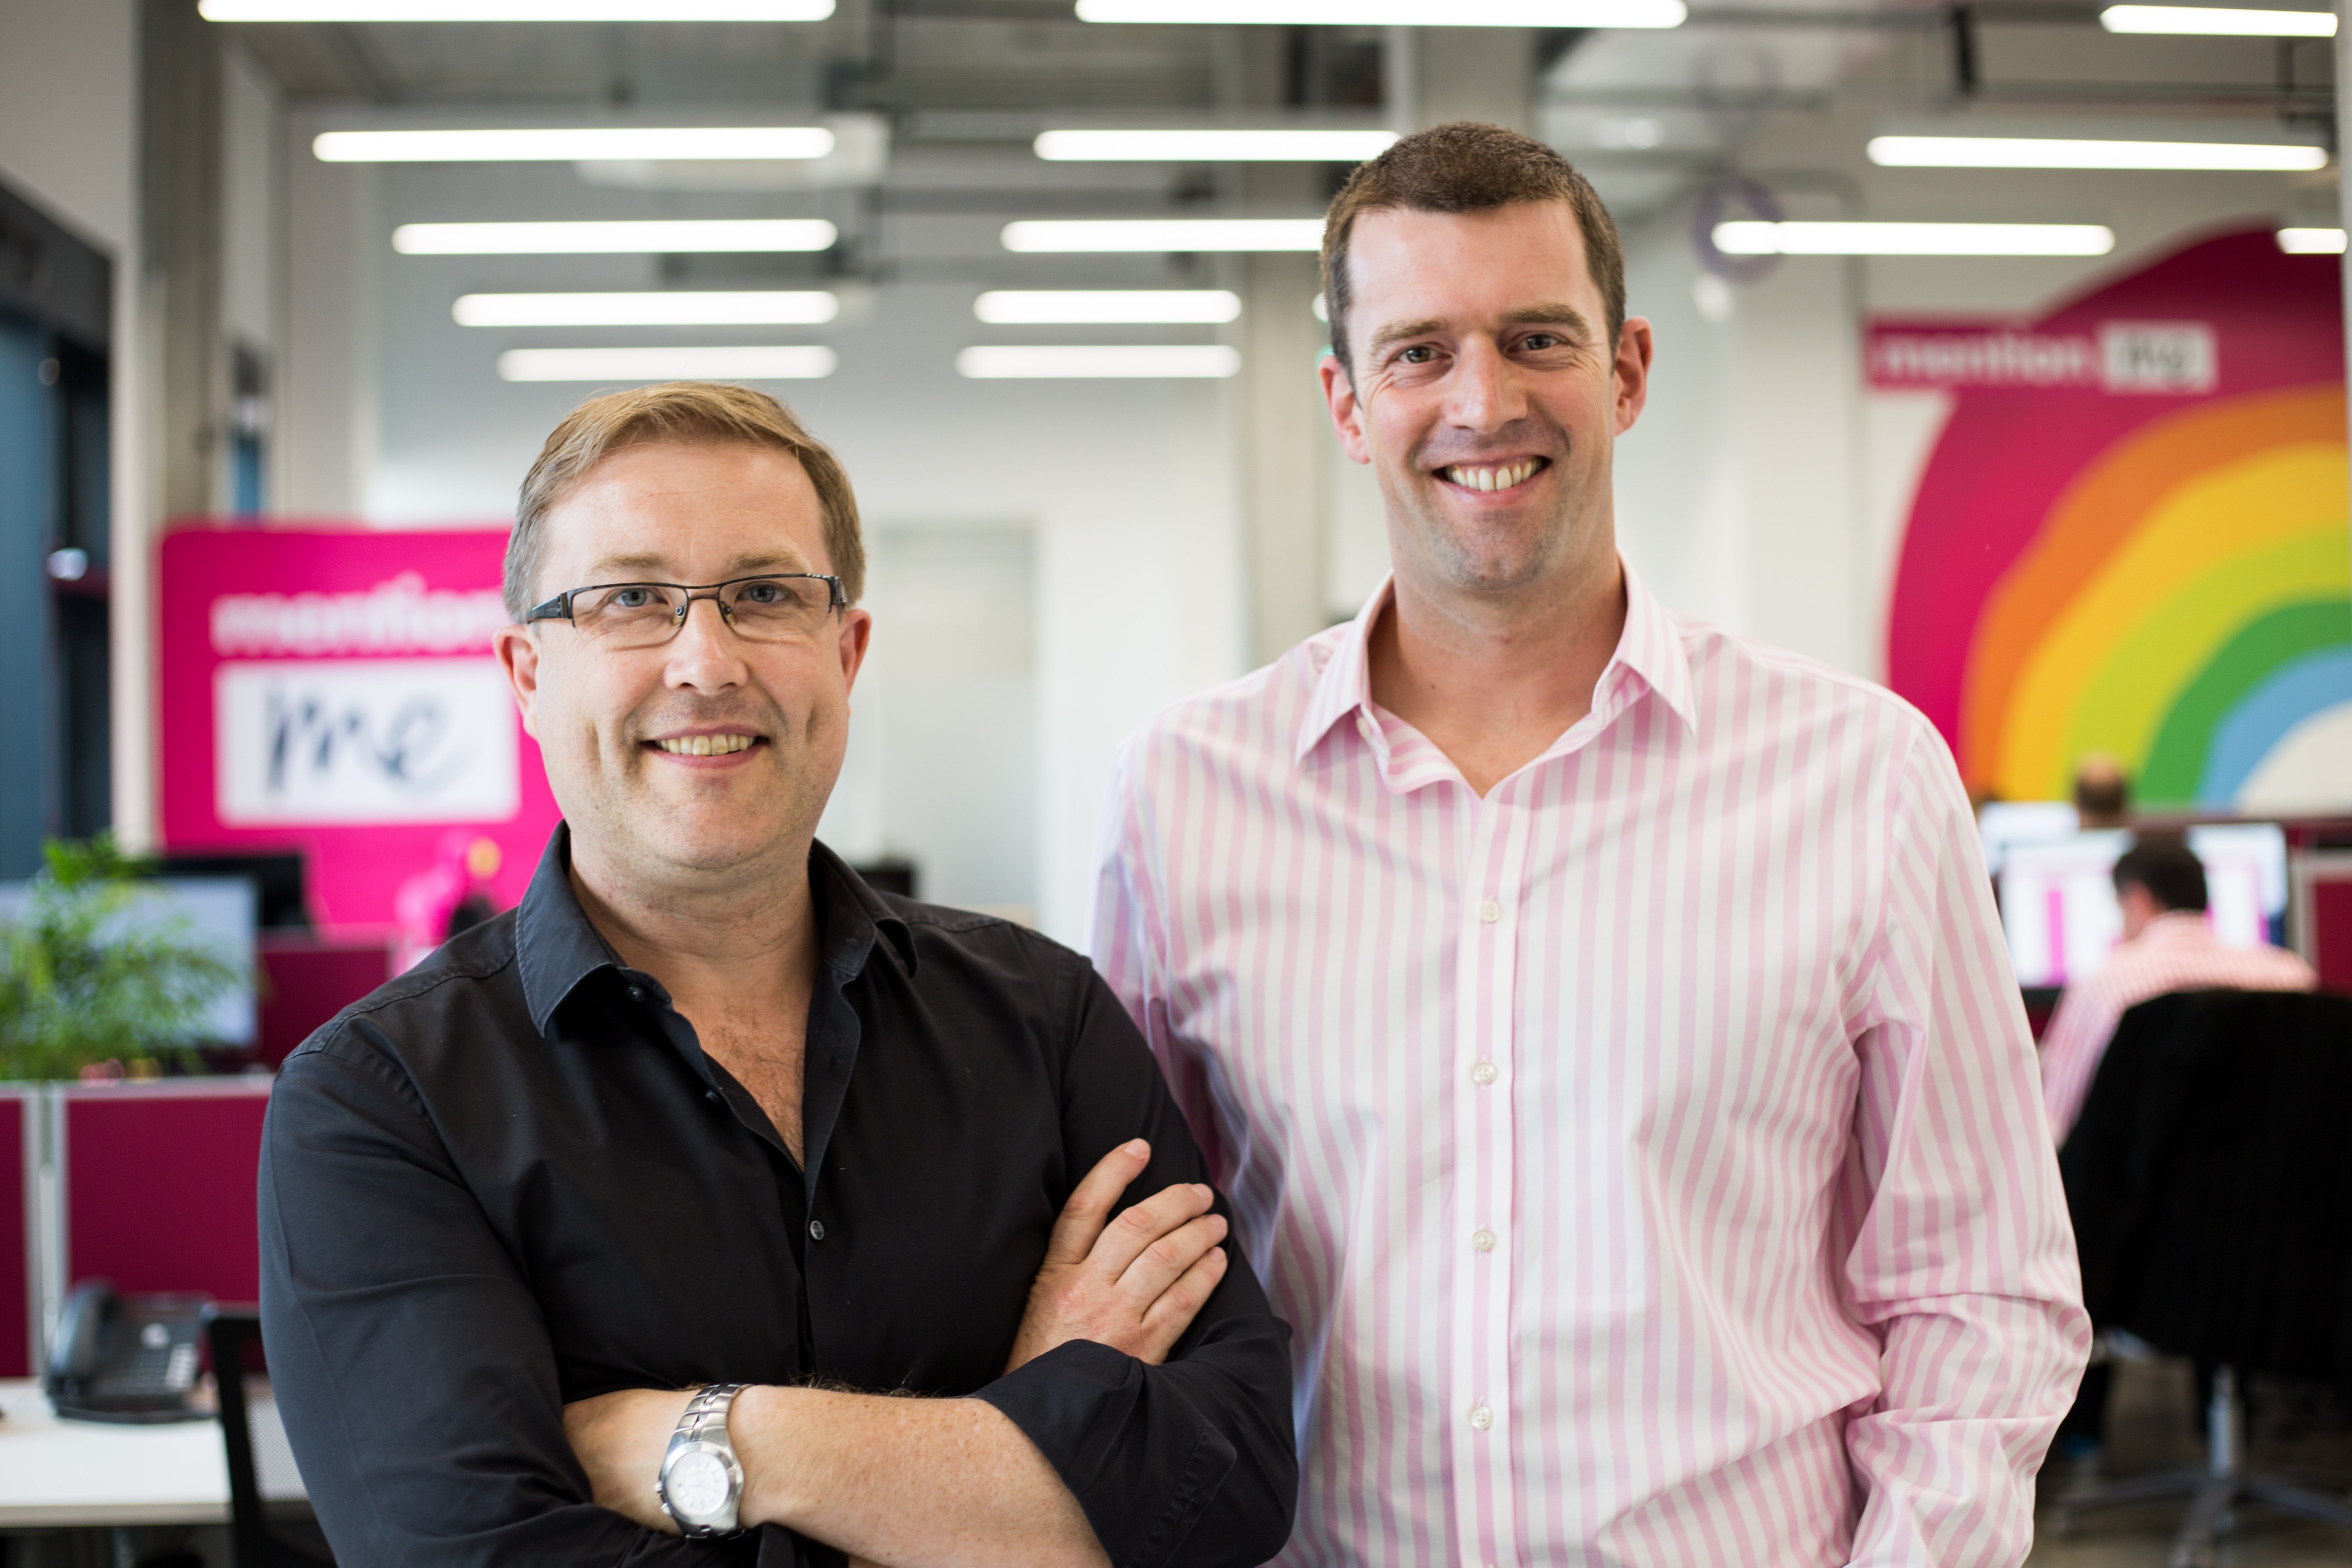 Mention Me co-founders Tim Boughton and Andy Cockburn